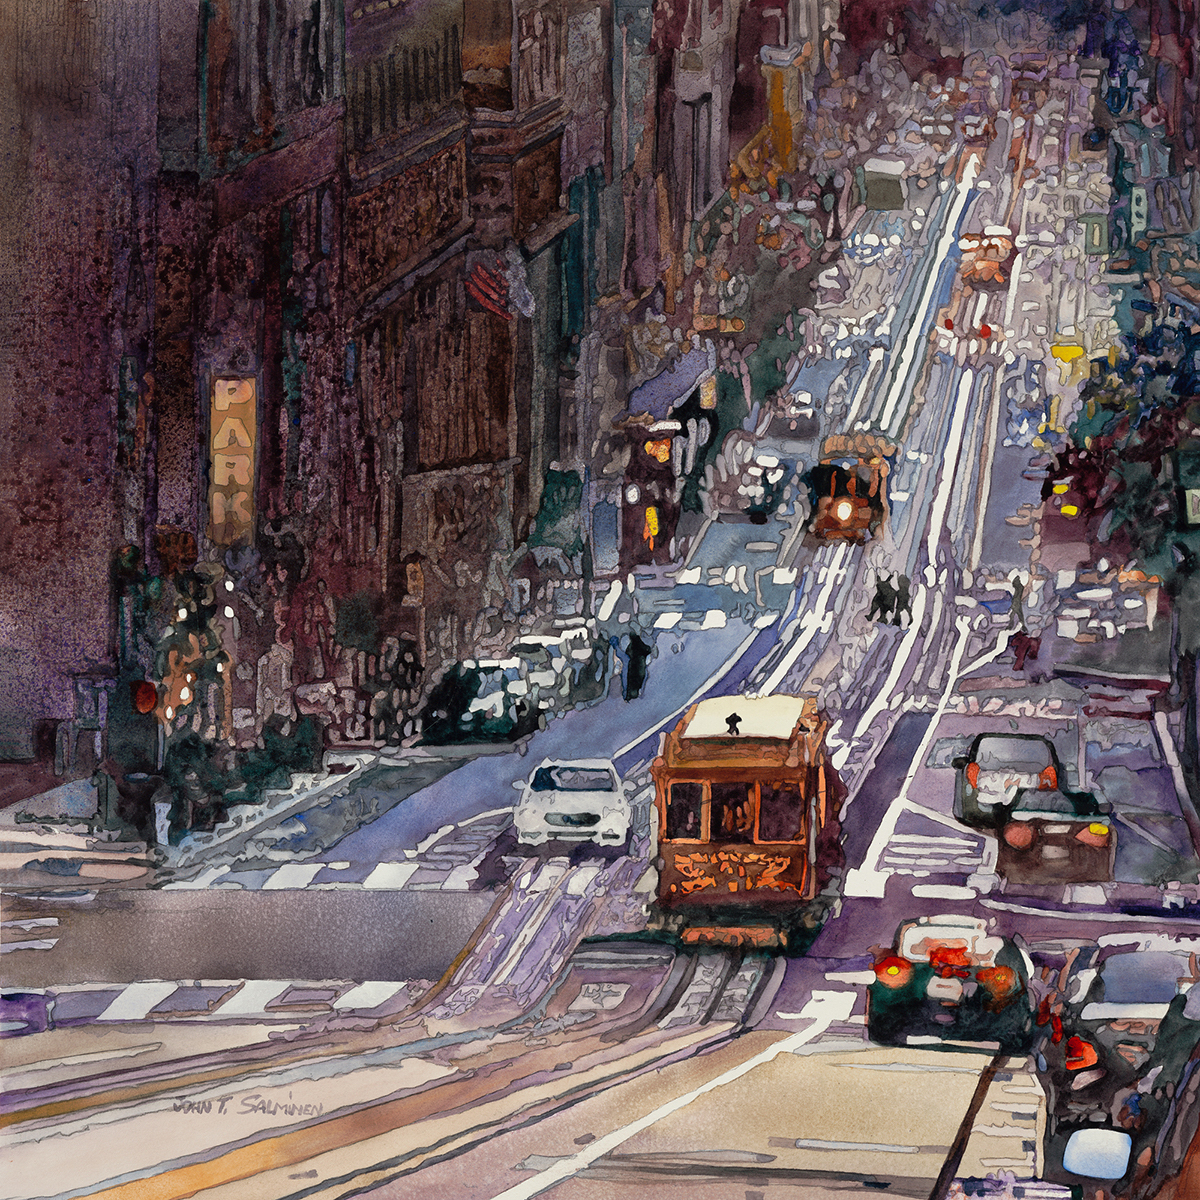 John Salminen, "California Line," watercolor, 25 x 25 in., available in the Watercolor Live faculty auction